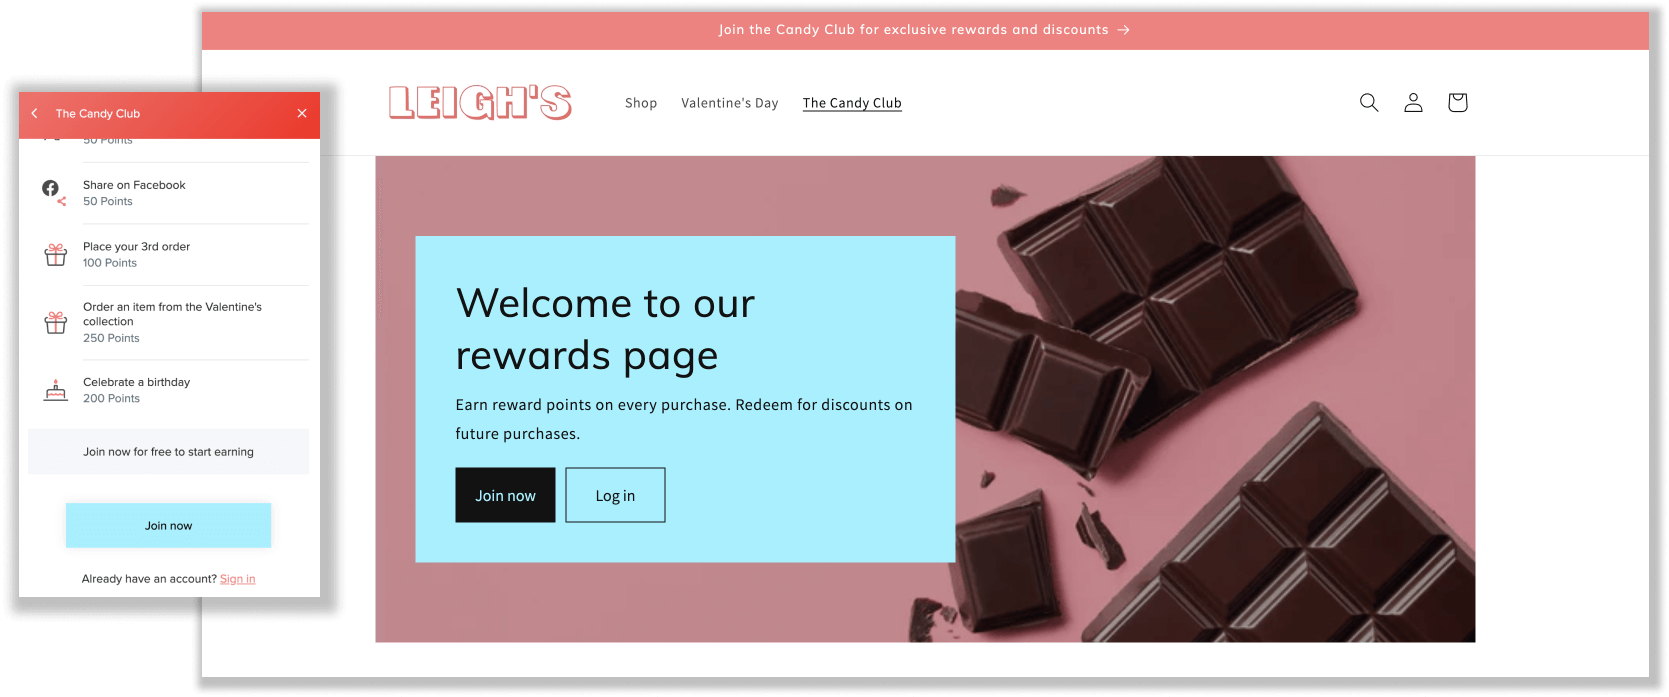 A screenshot of a loyalty program explainer page and the rewards panel showing how to earn points. Custom actions include placing a third order and ordering from the Valentine’s Day collection. 